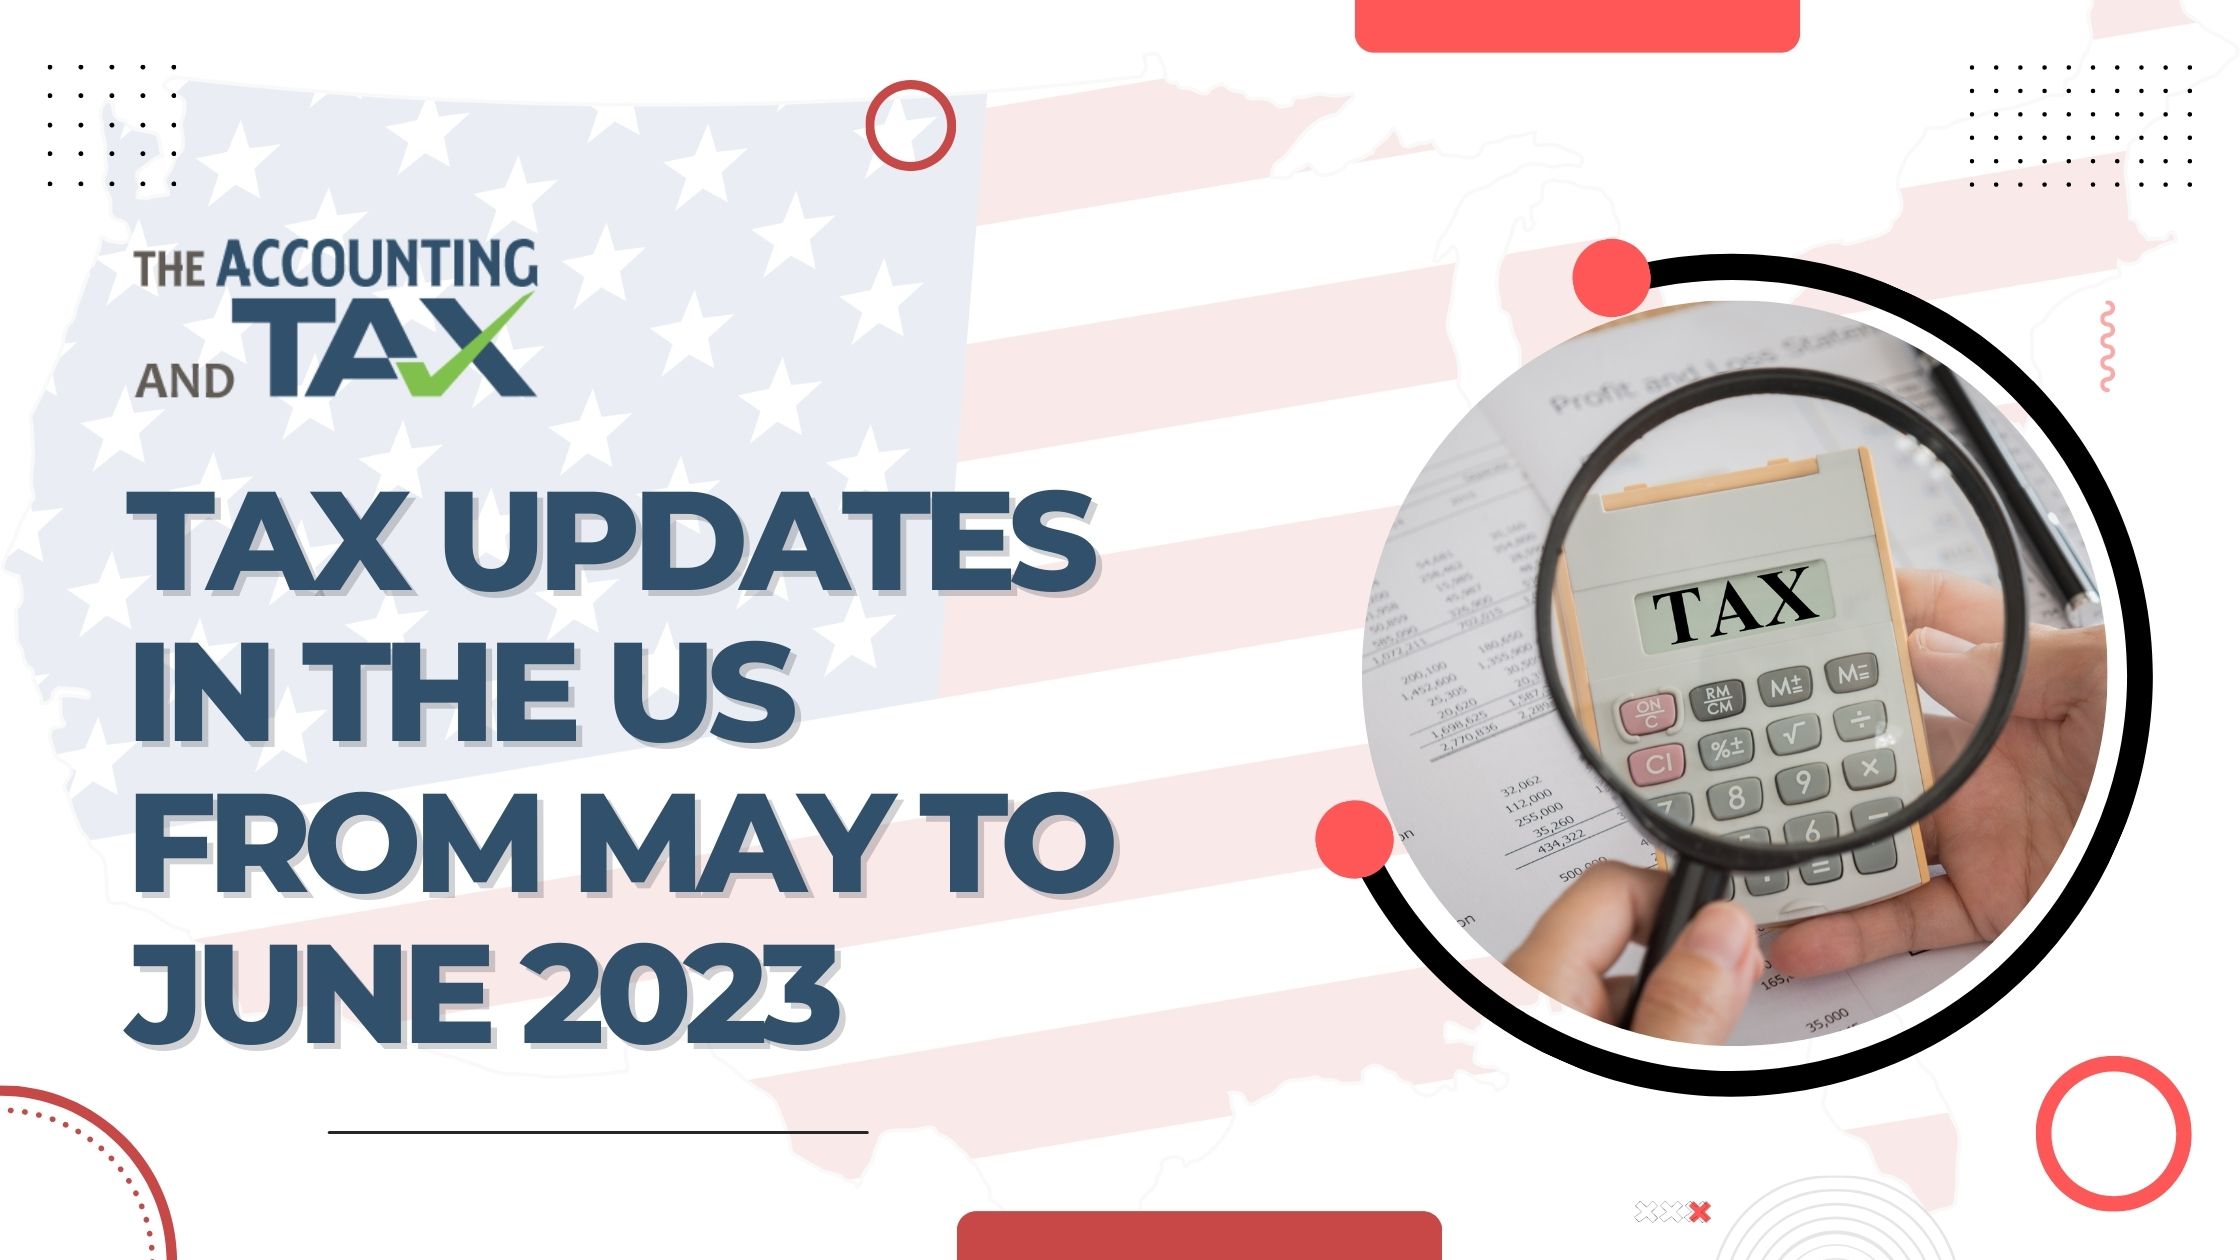 Tax updates in the US from May to June 2023